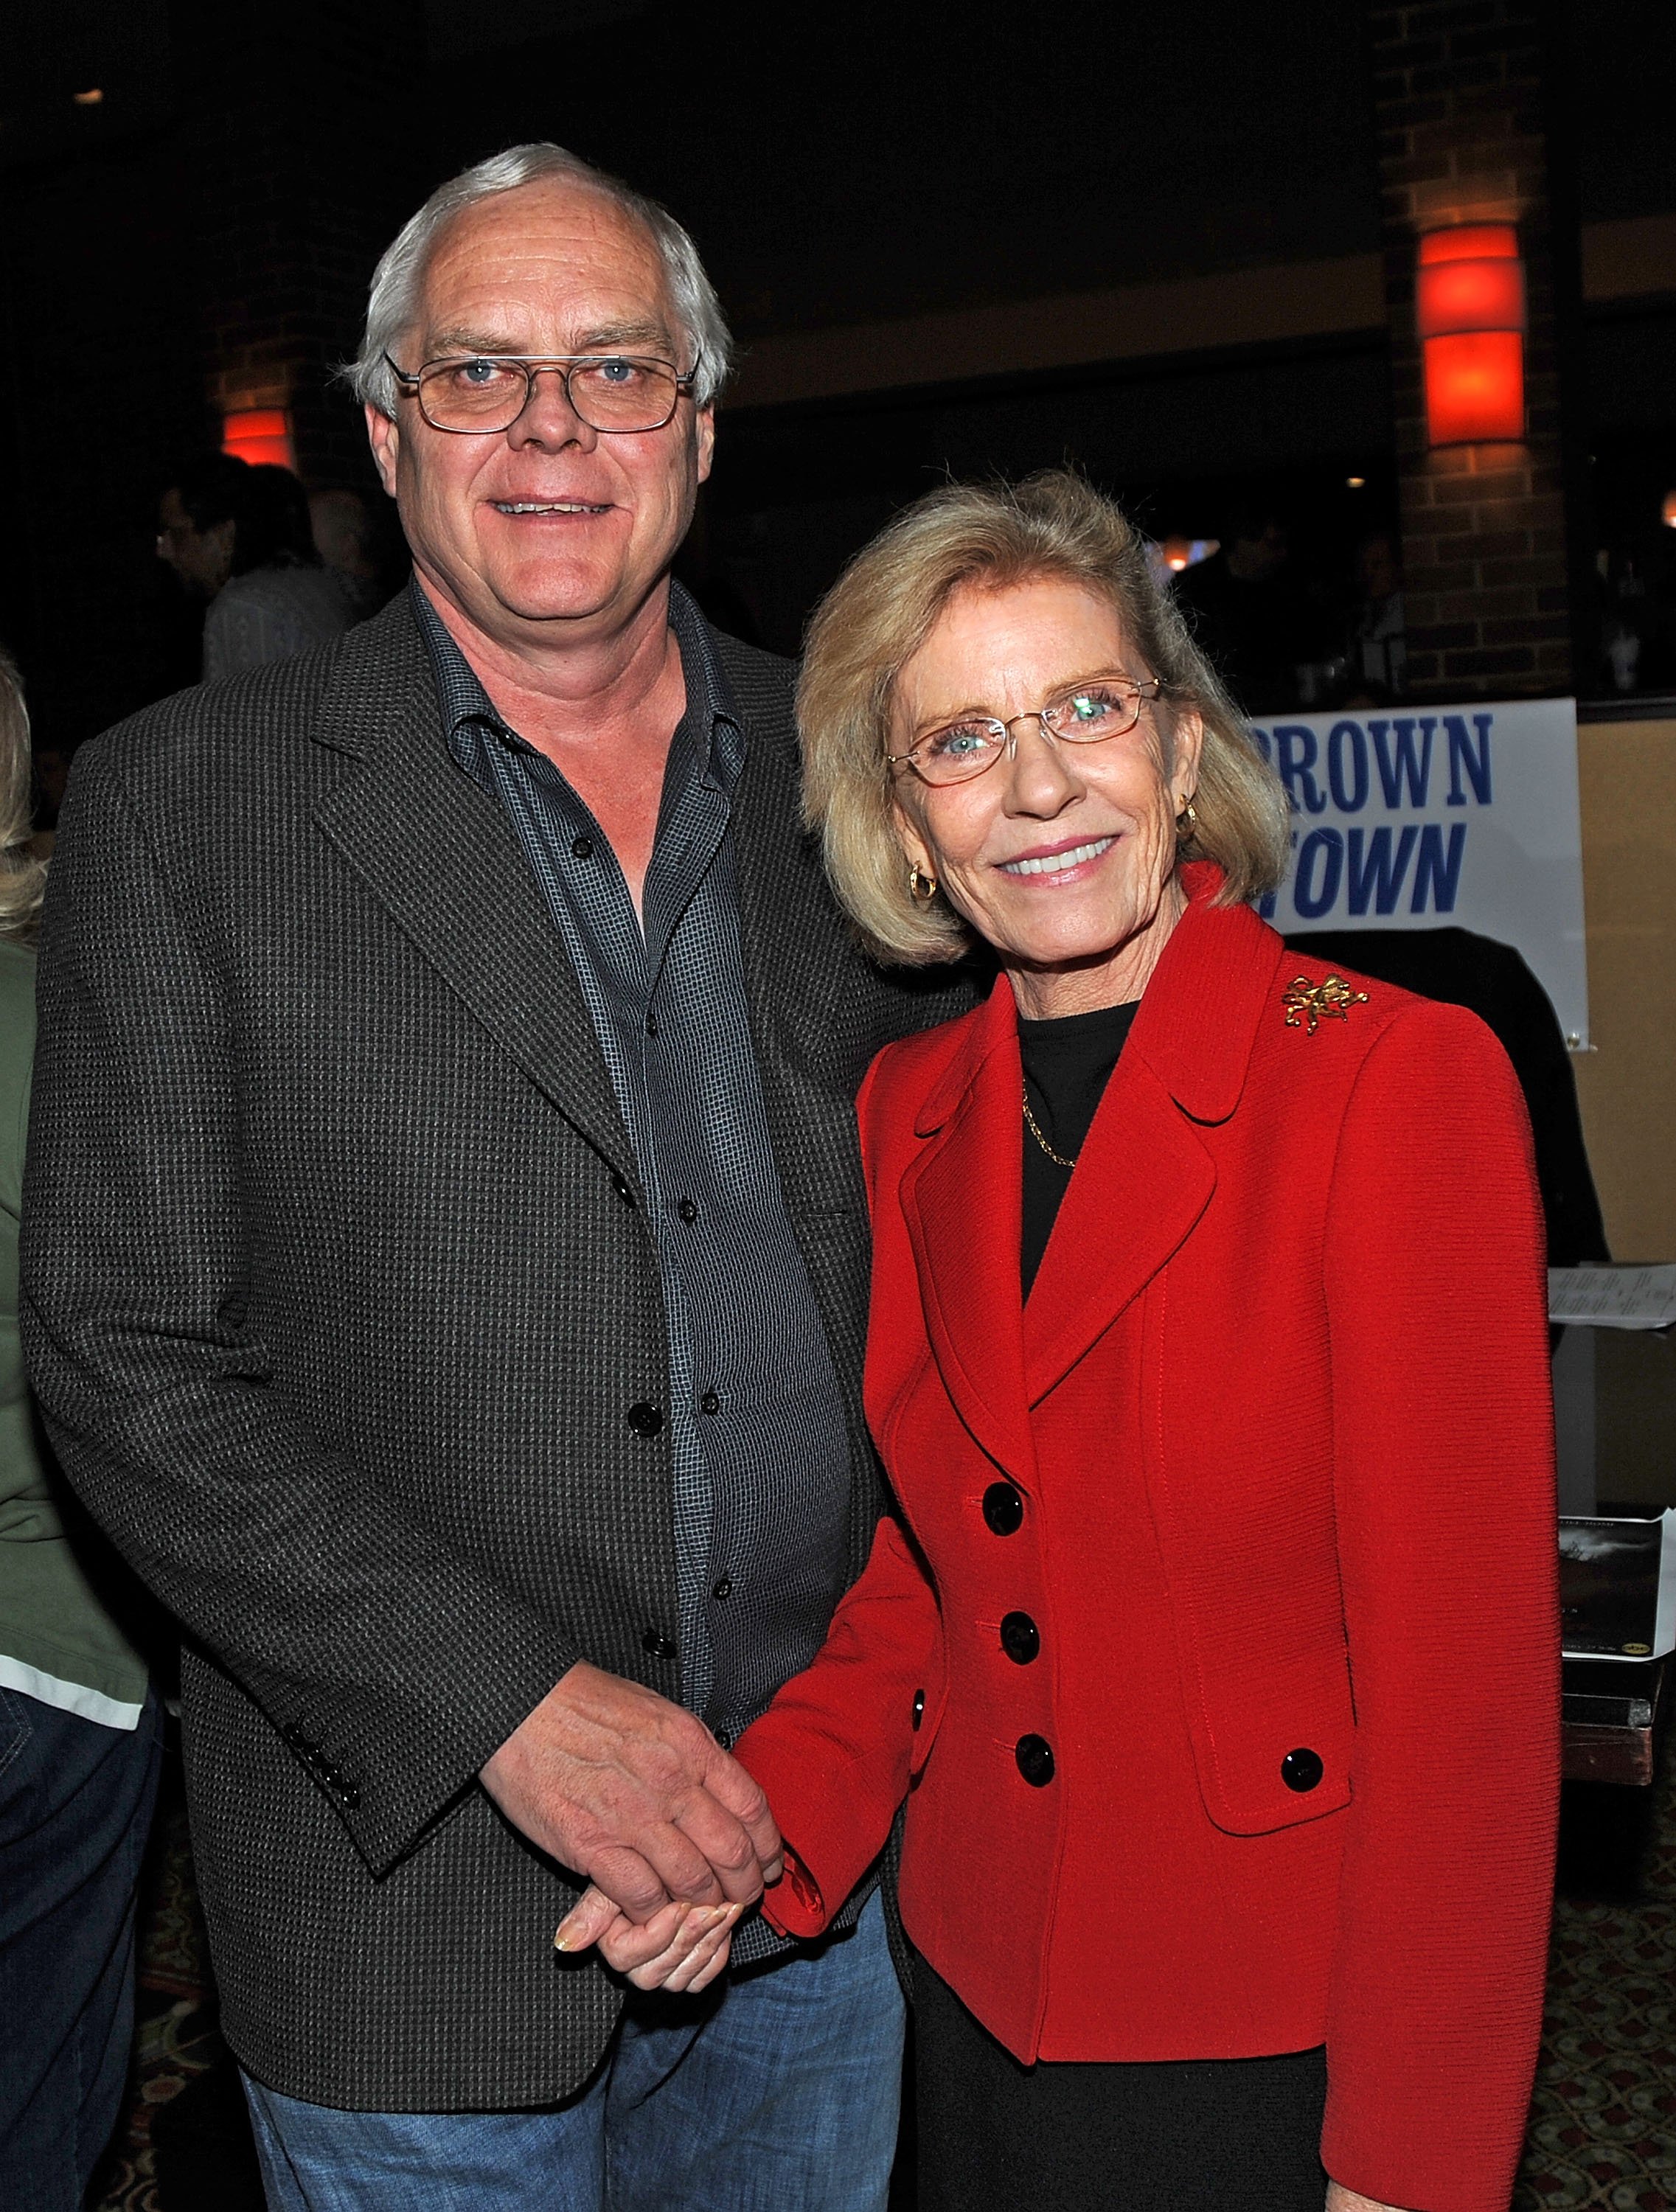 Patty Duke and her husband Michael Pearce attend Day 1 of the 2010 Chiller Theatre Expo at Hilton on October 29, 2010 in Parsippany, New Jersey. | Source: Getty Images